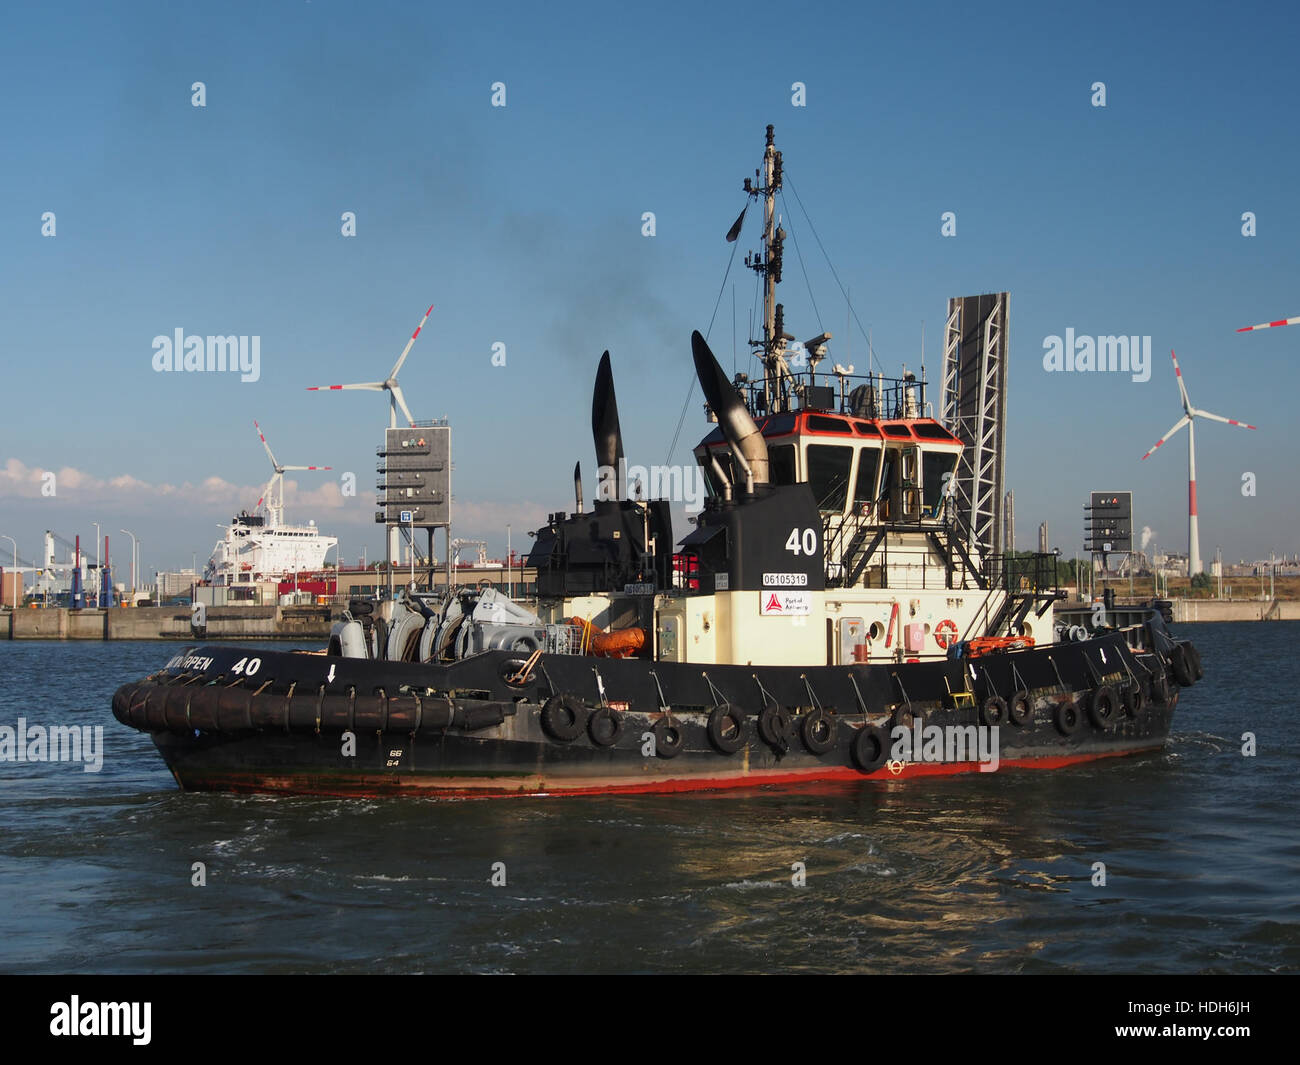 40 (tugboat, 2012) at the kai in front of the Berendrechtlock pic5 Stock Photo